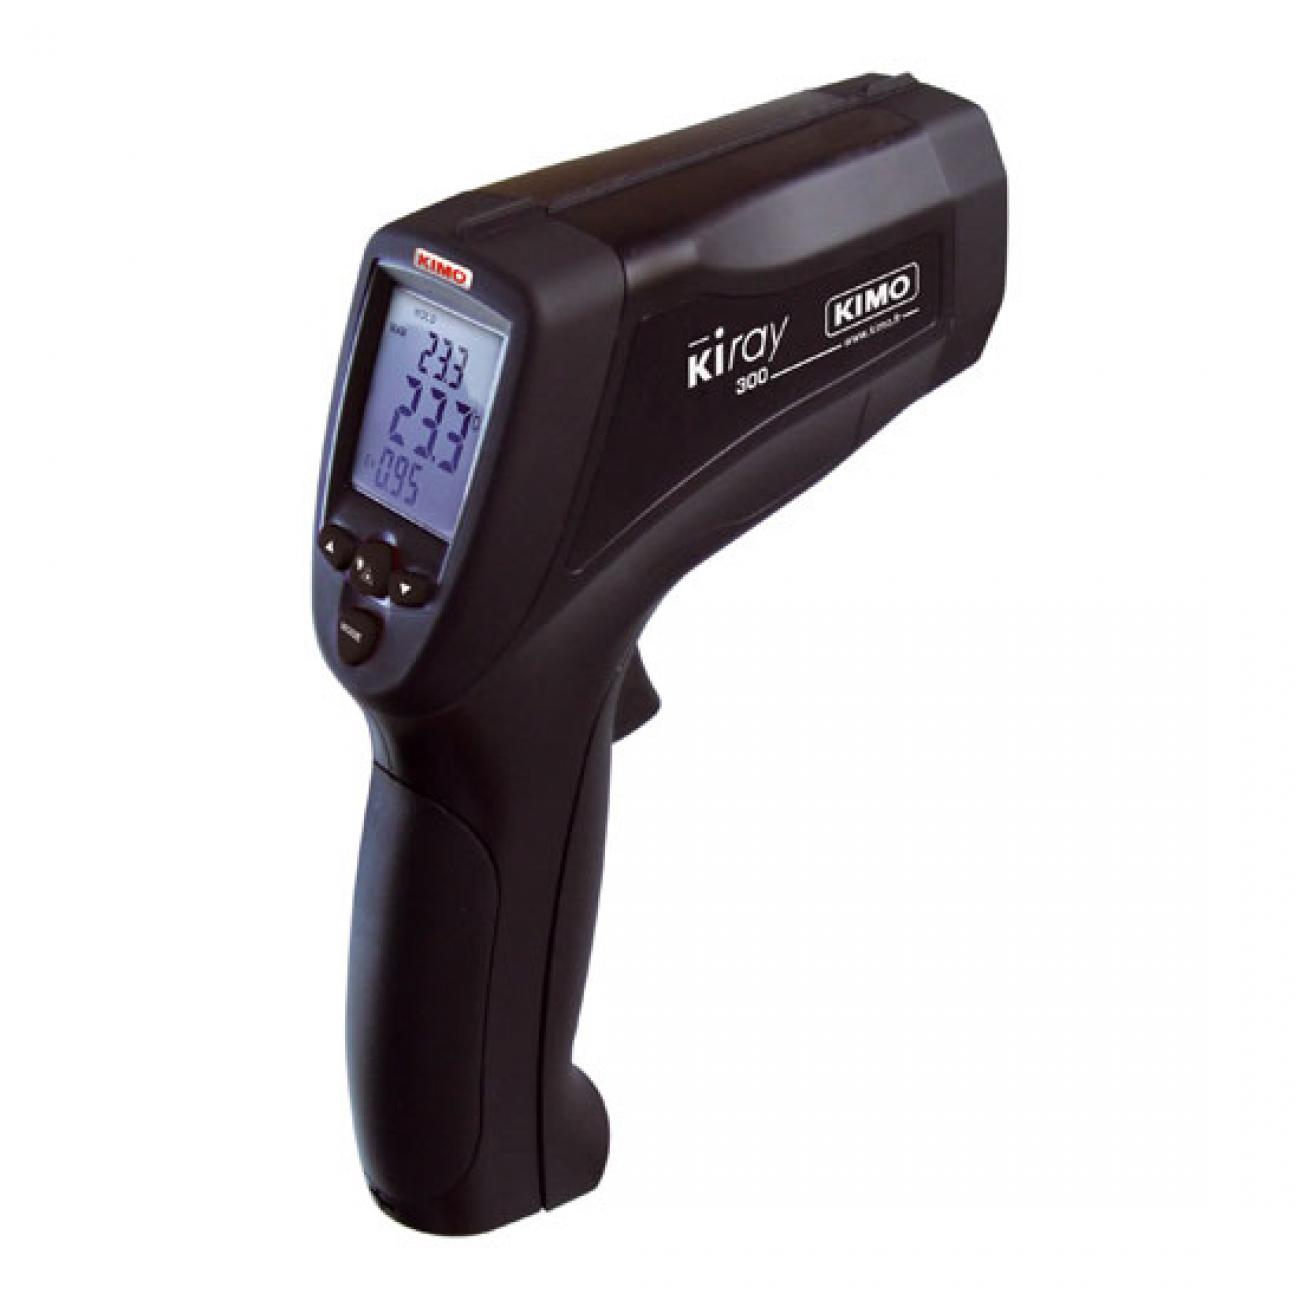 KIRAY 300 Infrared thermometer